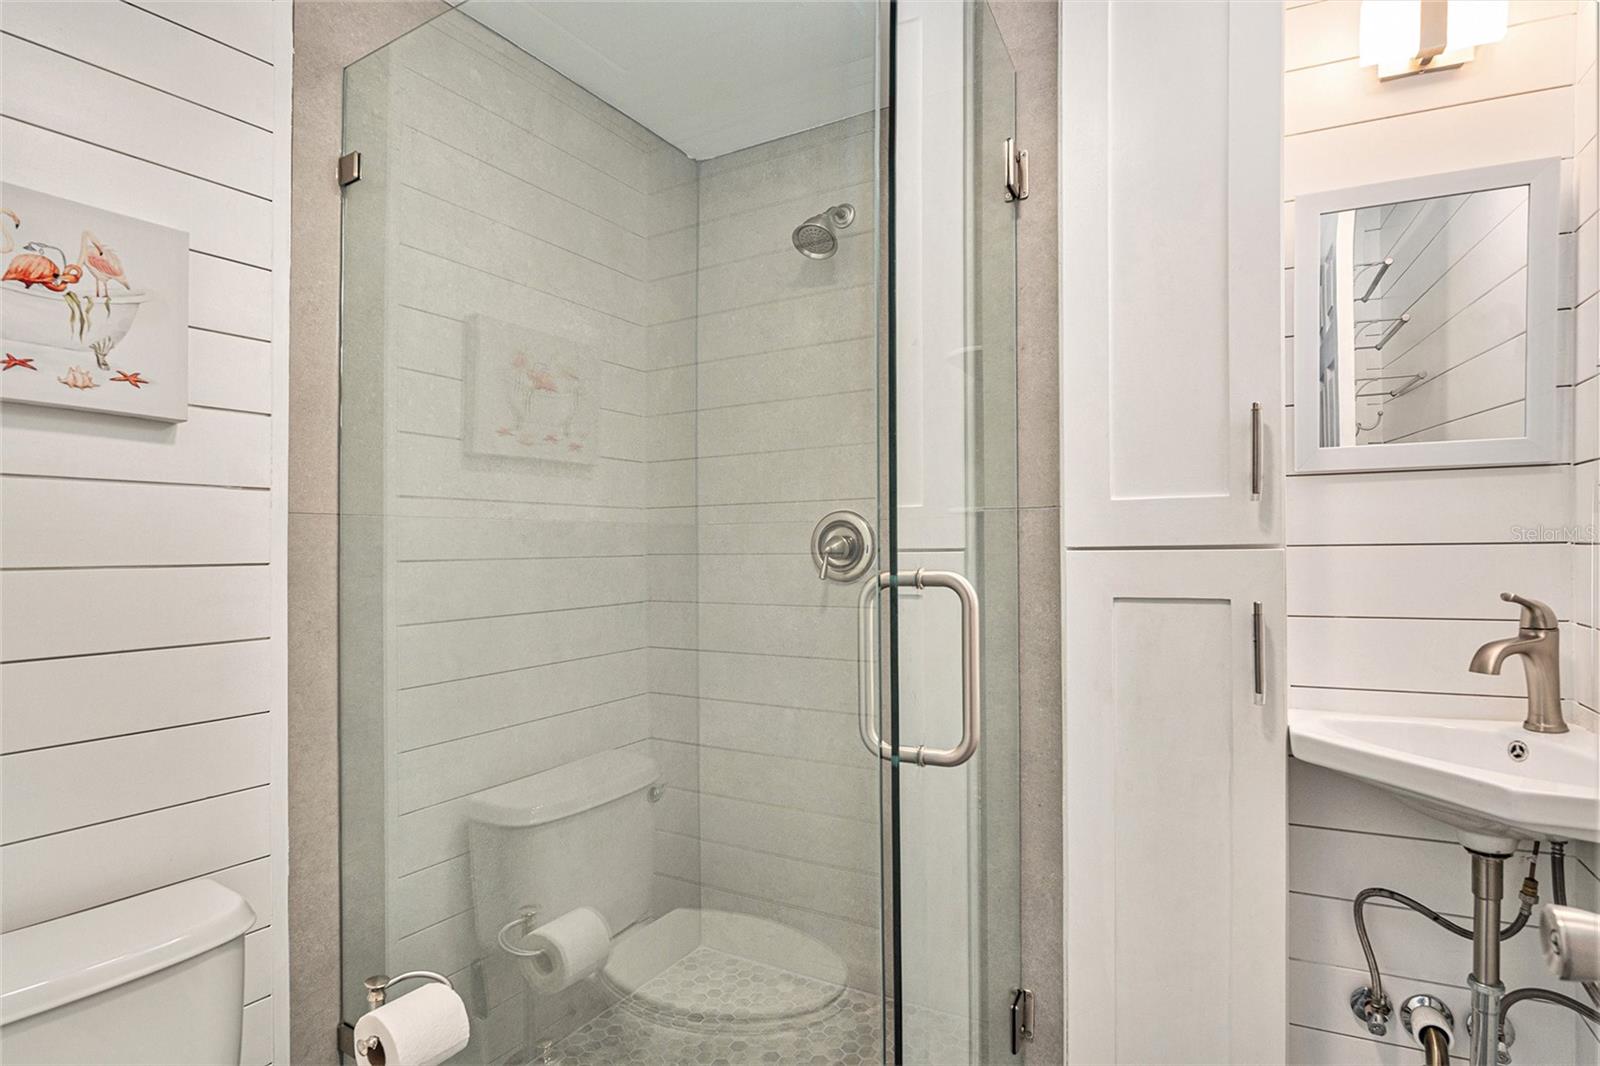 What a great guest bath complete with glass enclosed shower, sink, storage and more!